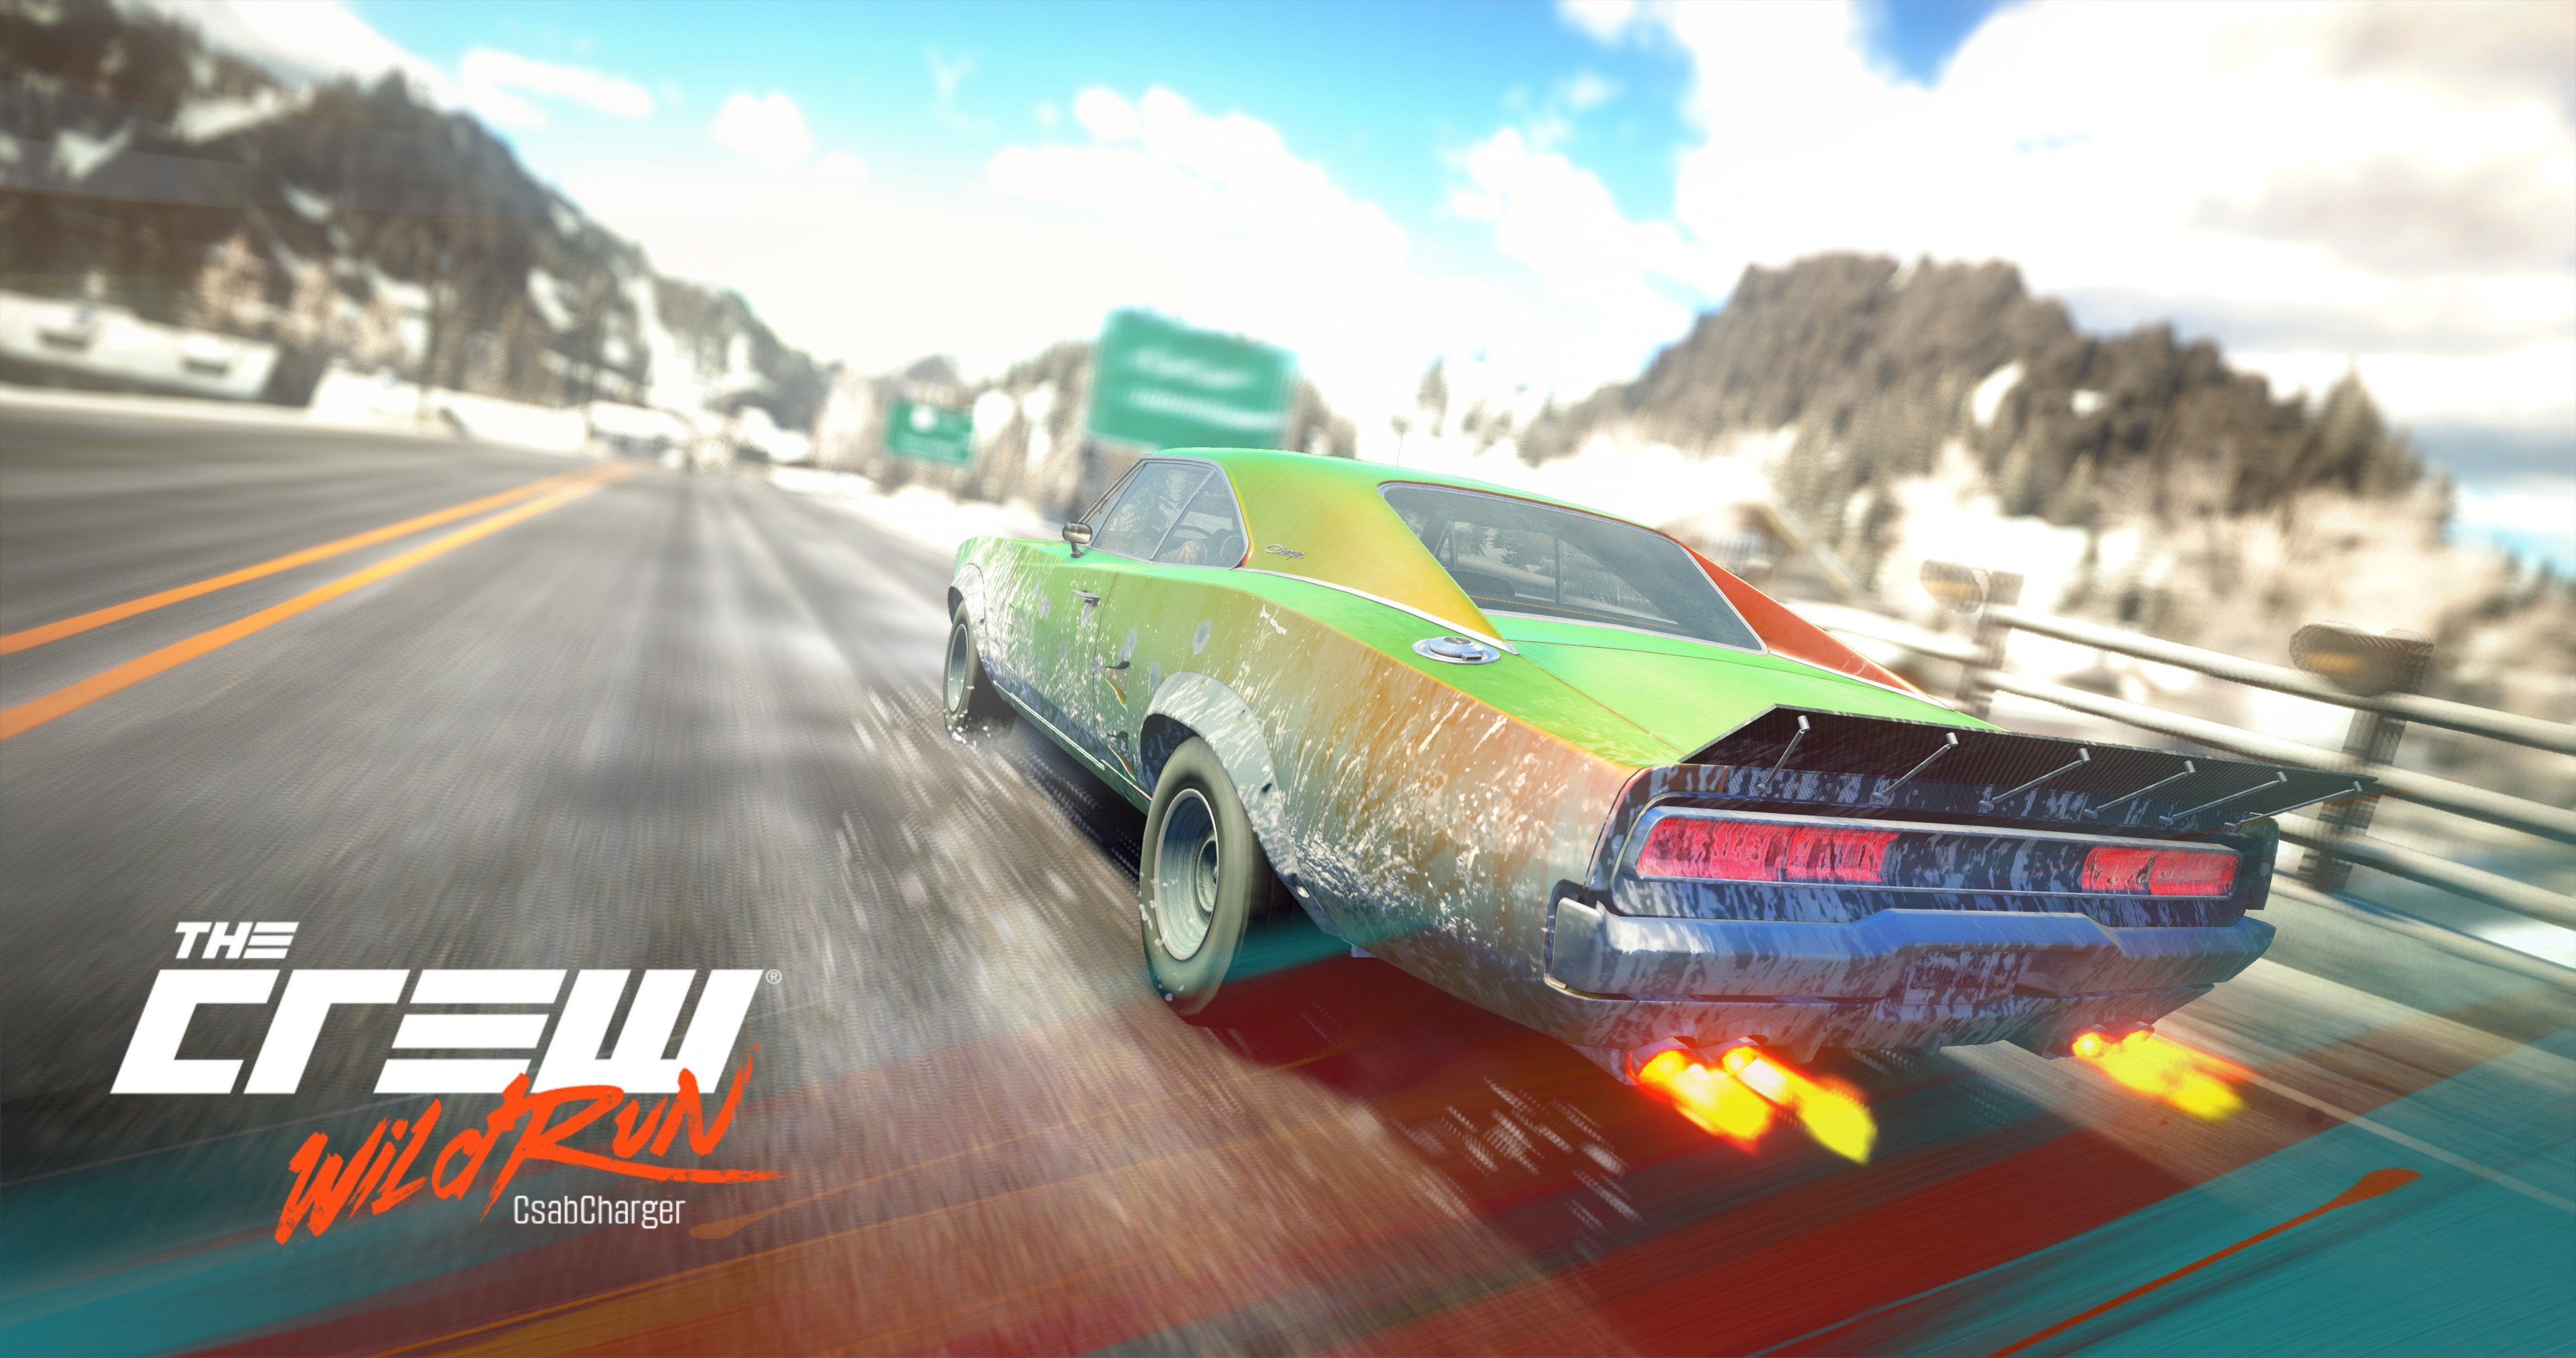 Dodge Charger R T 1968, The Crew, The Crew Wild Run, Race cars Wallpaper